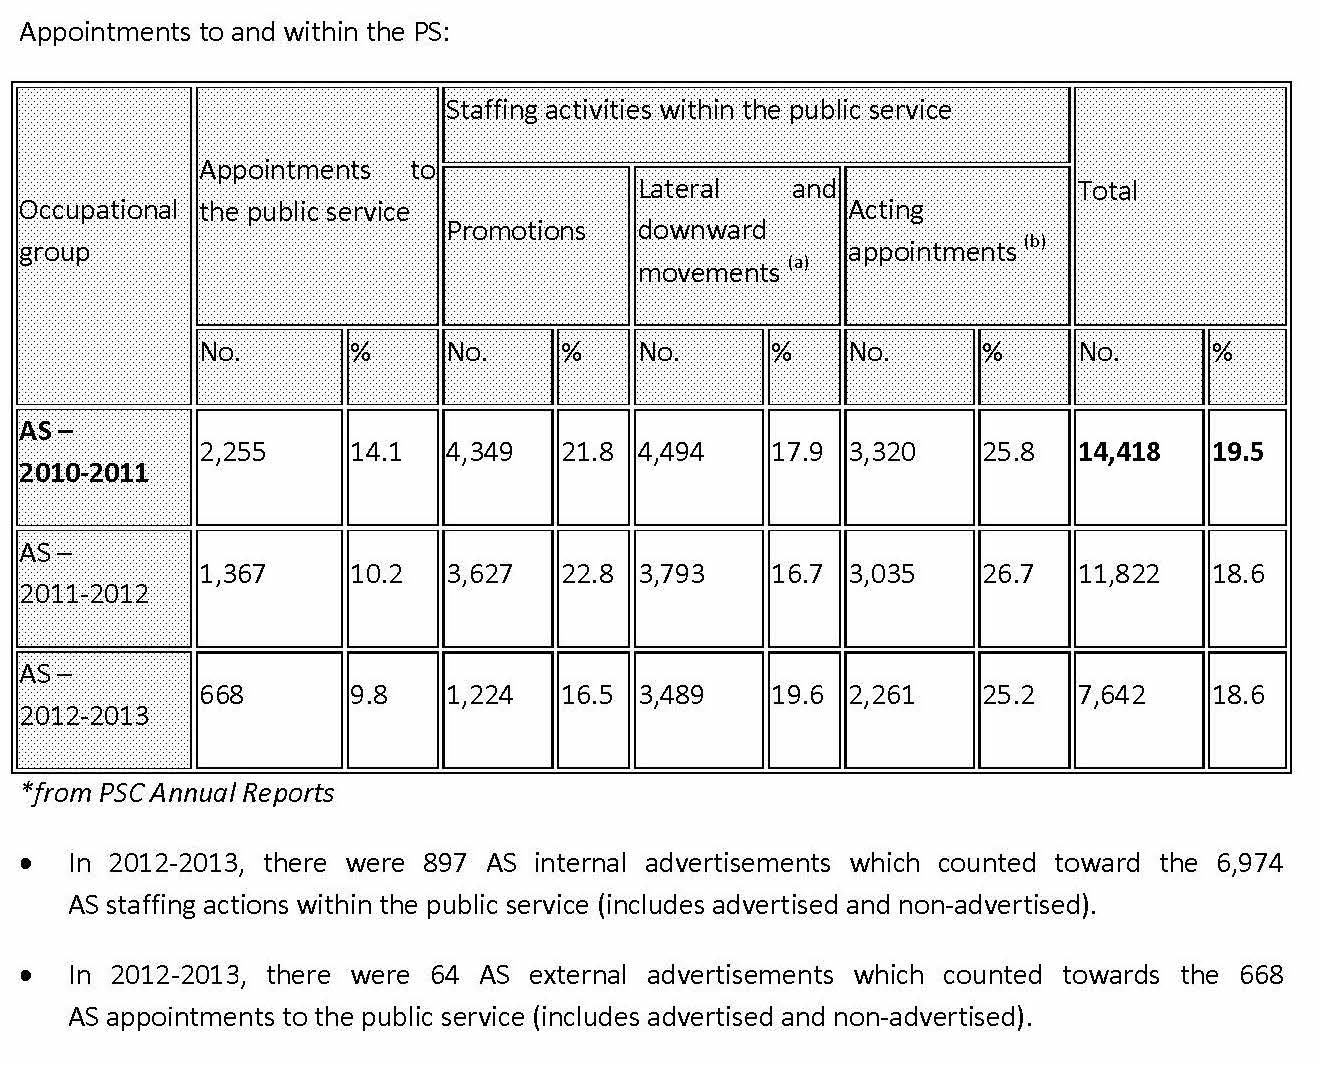 A statistical table showing appointments to and within the public service, alongside staffing activities including promotions, lateral and downward movements, and acting appointments.